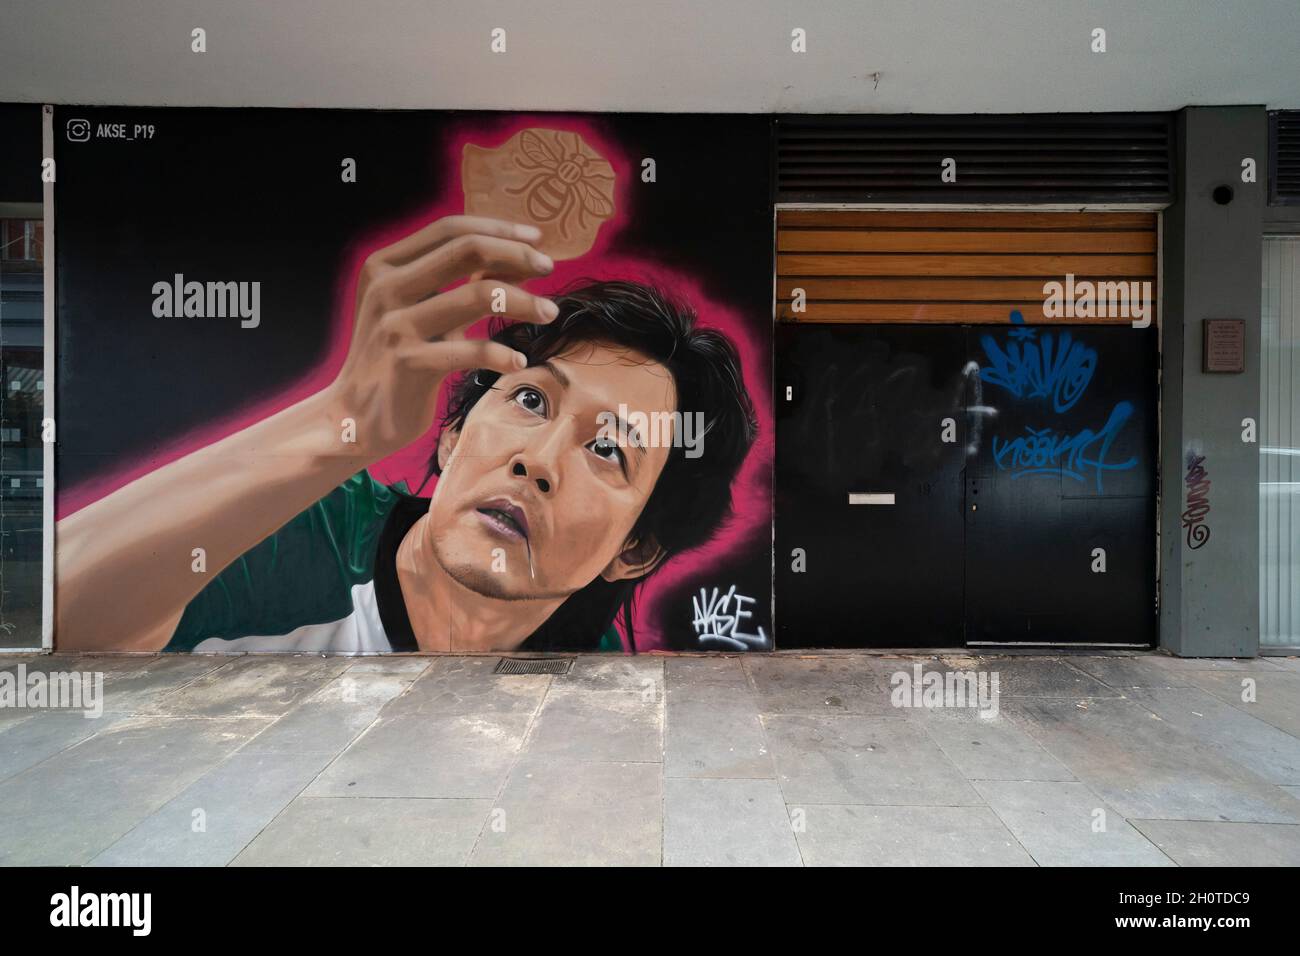 Manchester, UK. 14th October, 2021. A mural by the street artist Akse P19 along the theme of the popular Netflix series Squid Game is seen in Manchester, UK. Credit: Jon Super/Alamy Live News. Stock Photo